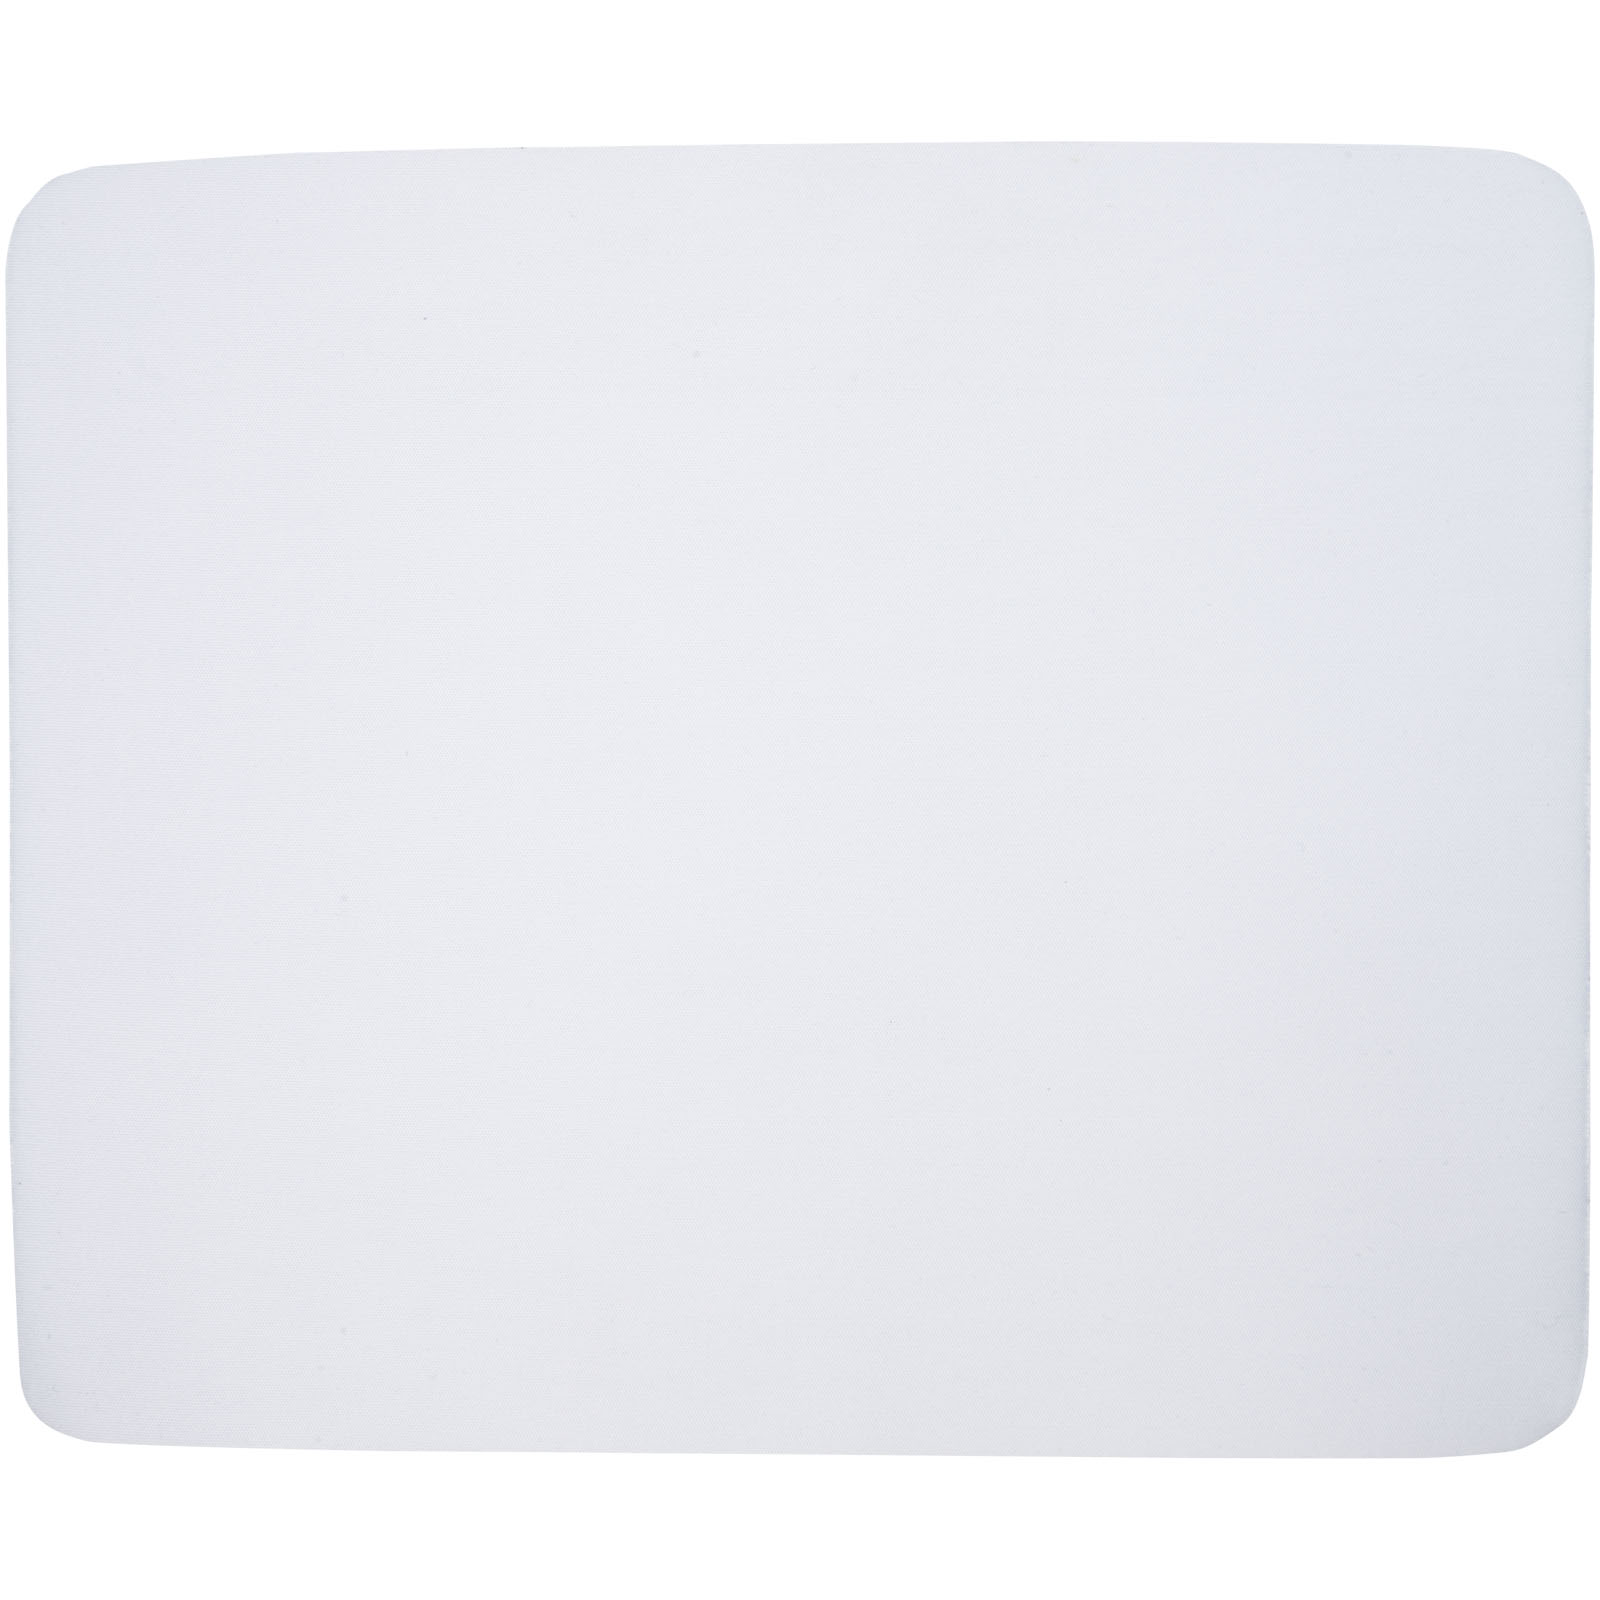 Advertising Computer Accessories - Pure mouse pad with antibacterial additive - 2